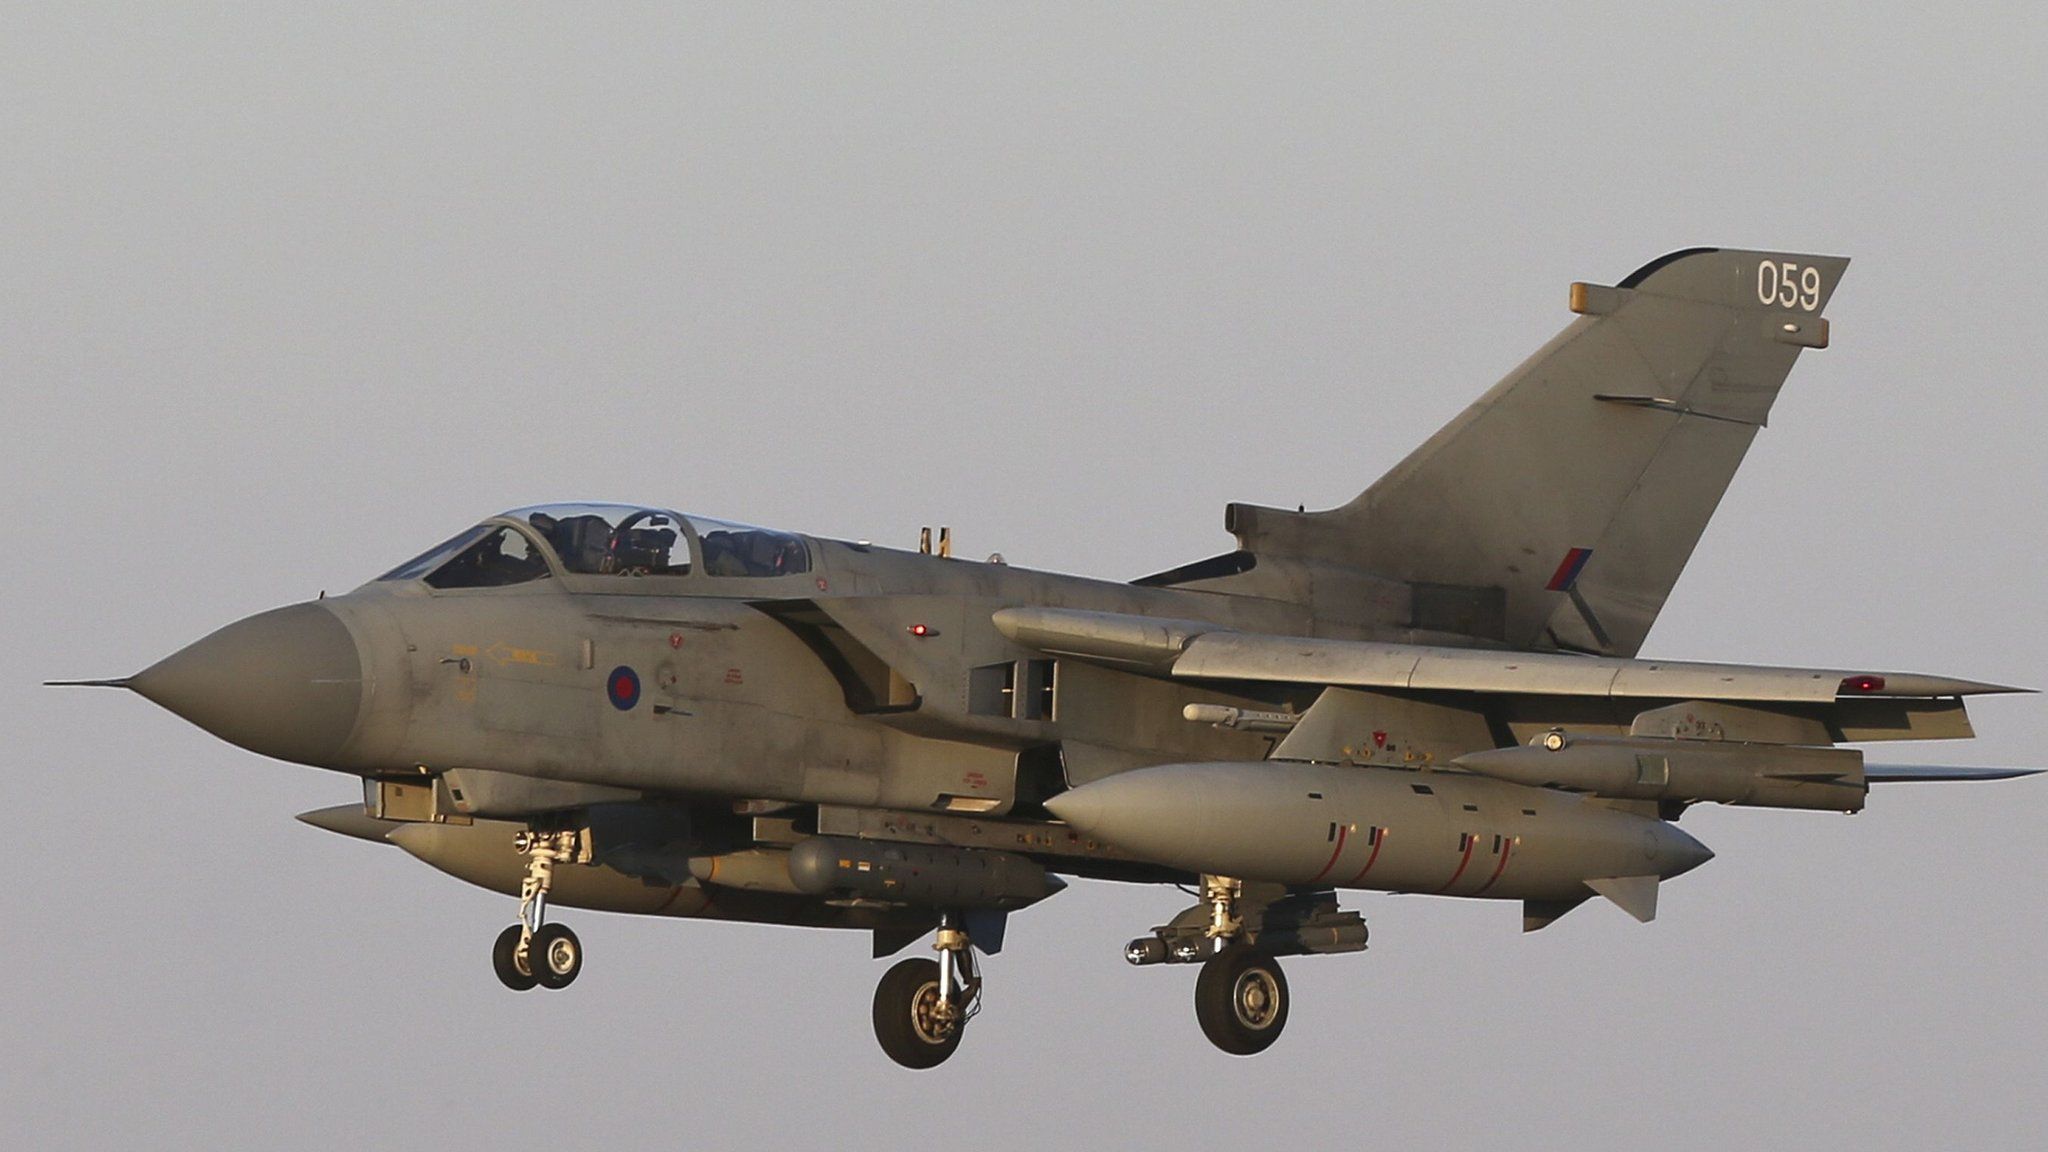 RAF Tornado GR4 returning to RAF Akrotiri in Cyprus after an armed mission in Iraq in September 2014